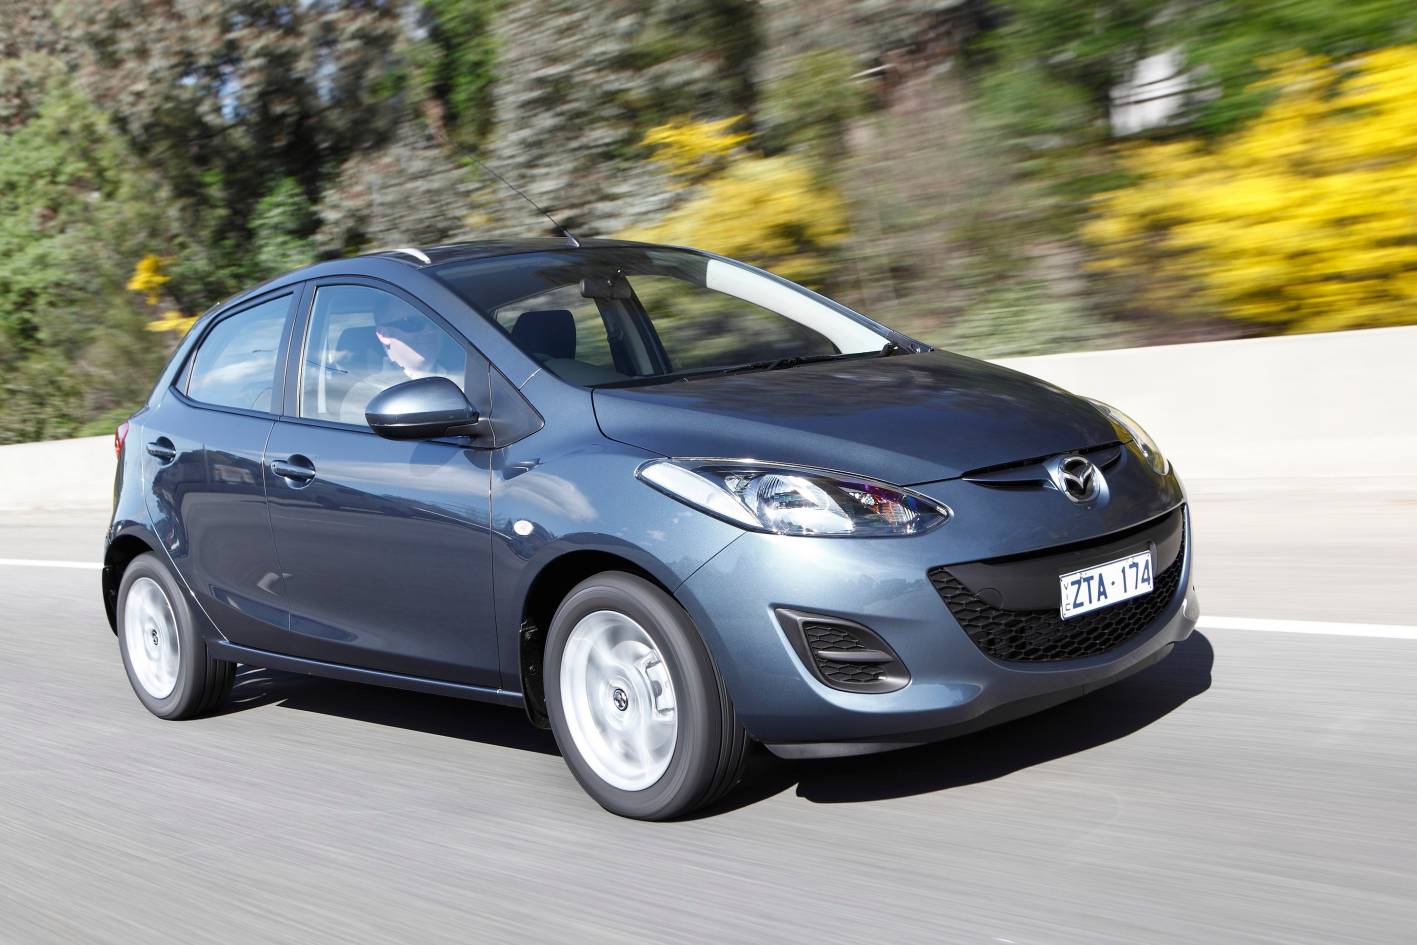 Mazda2-based SUV coming later in 2014 – report